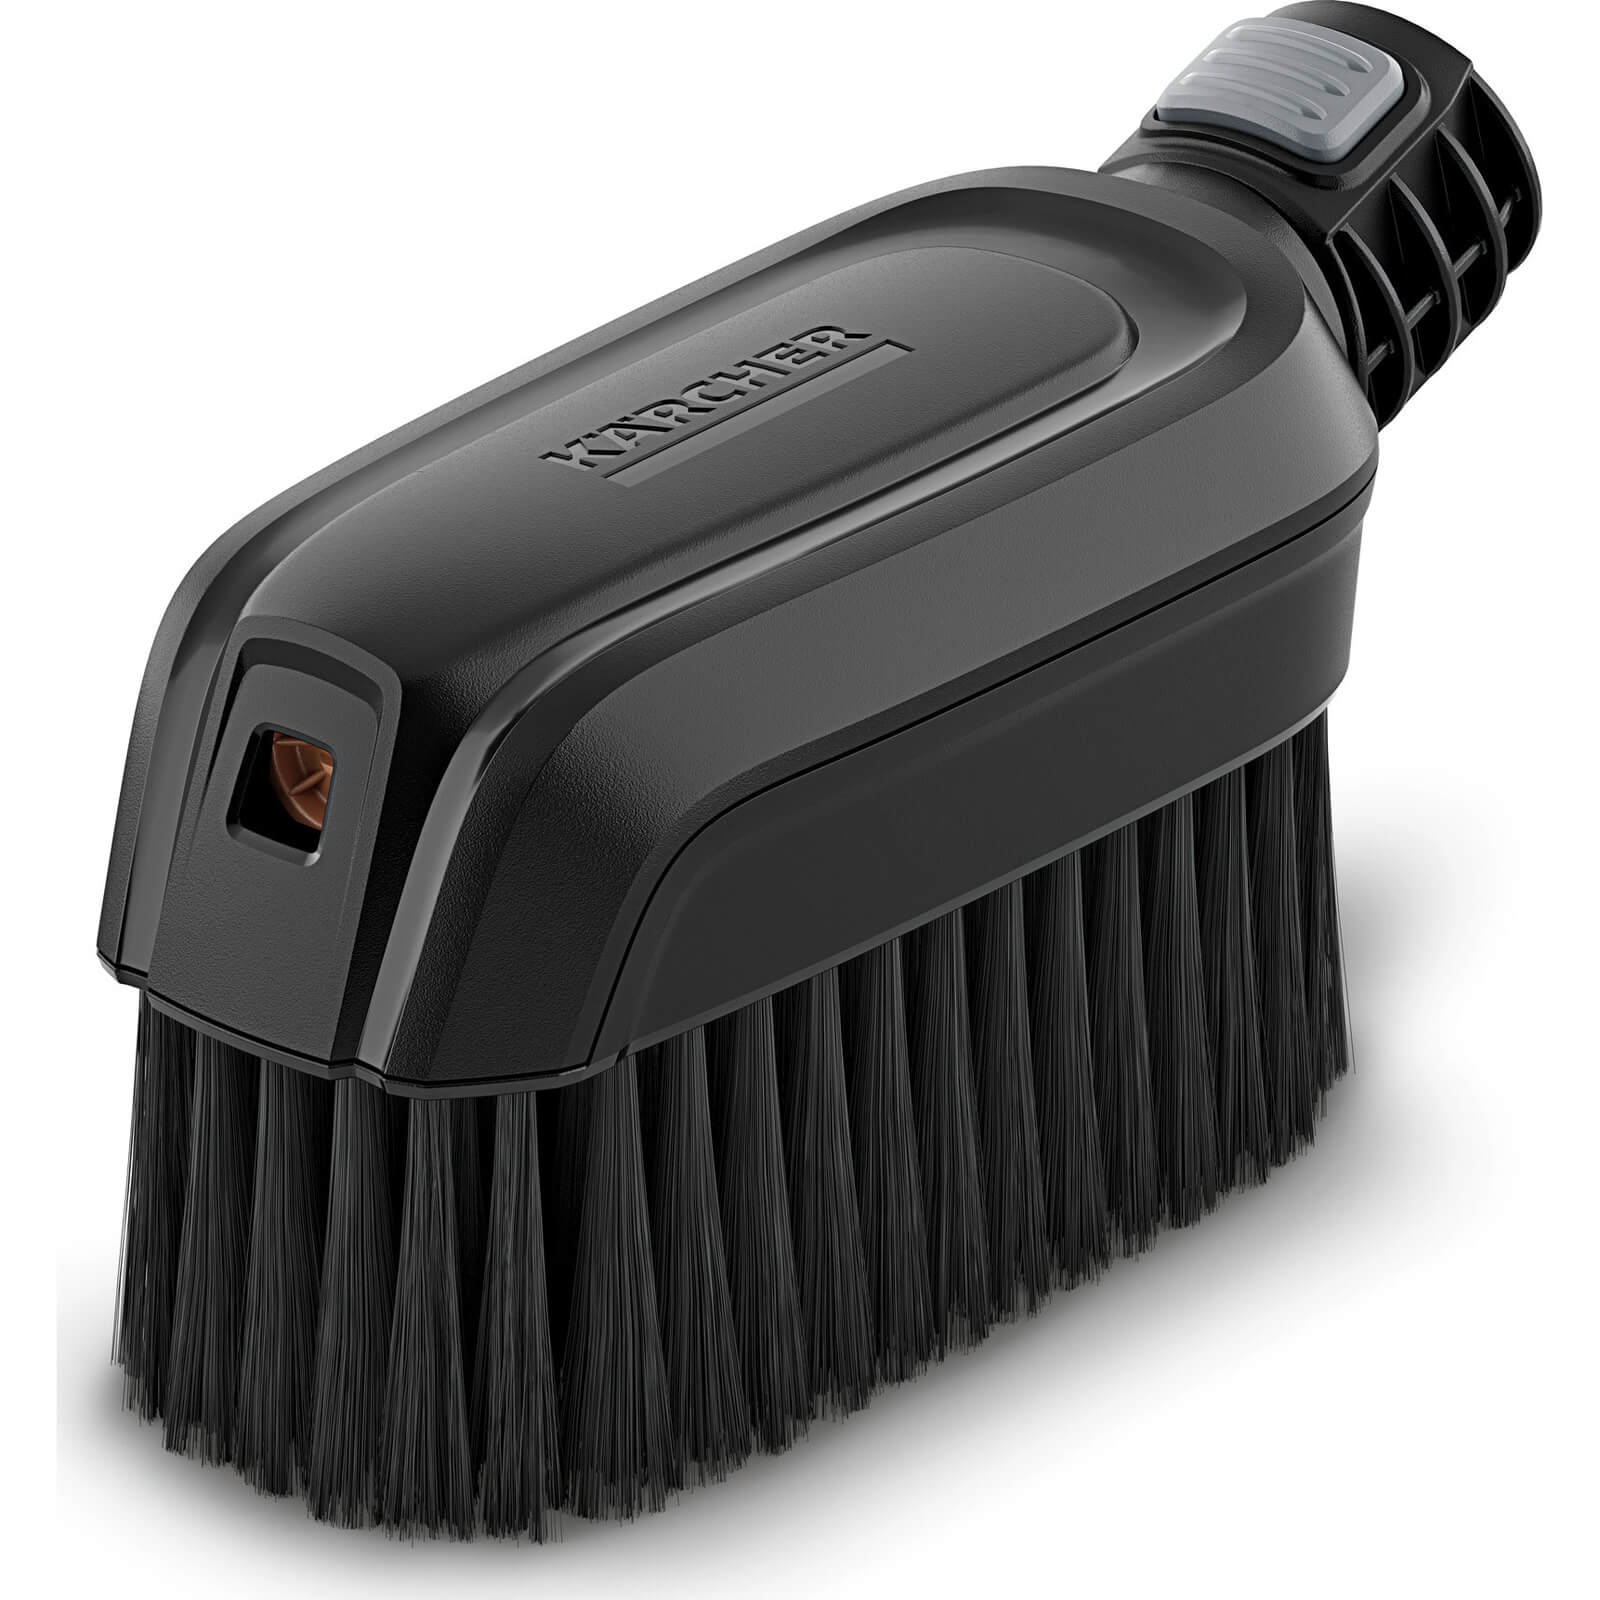 Karcher KHB 5 Wash Brush for KHB 5 and 6 Cordless Cleaners